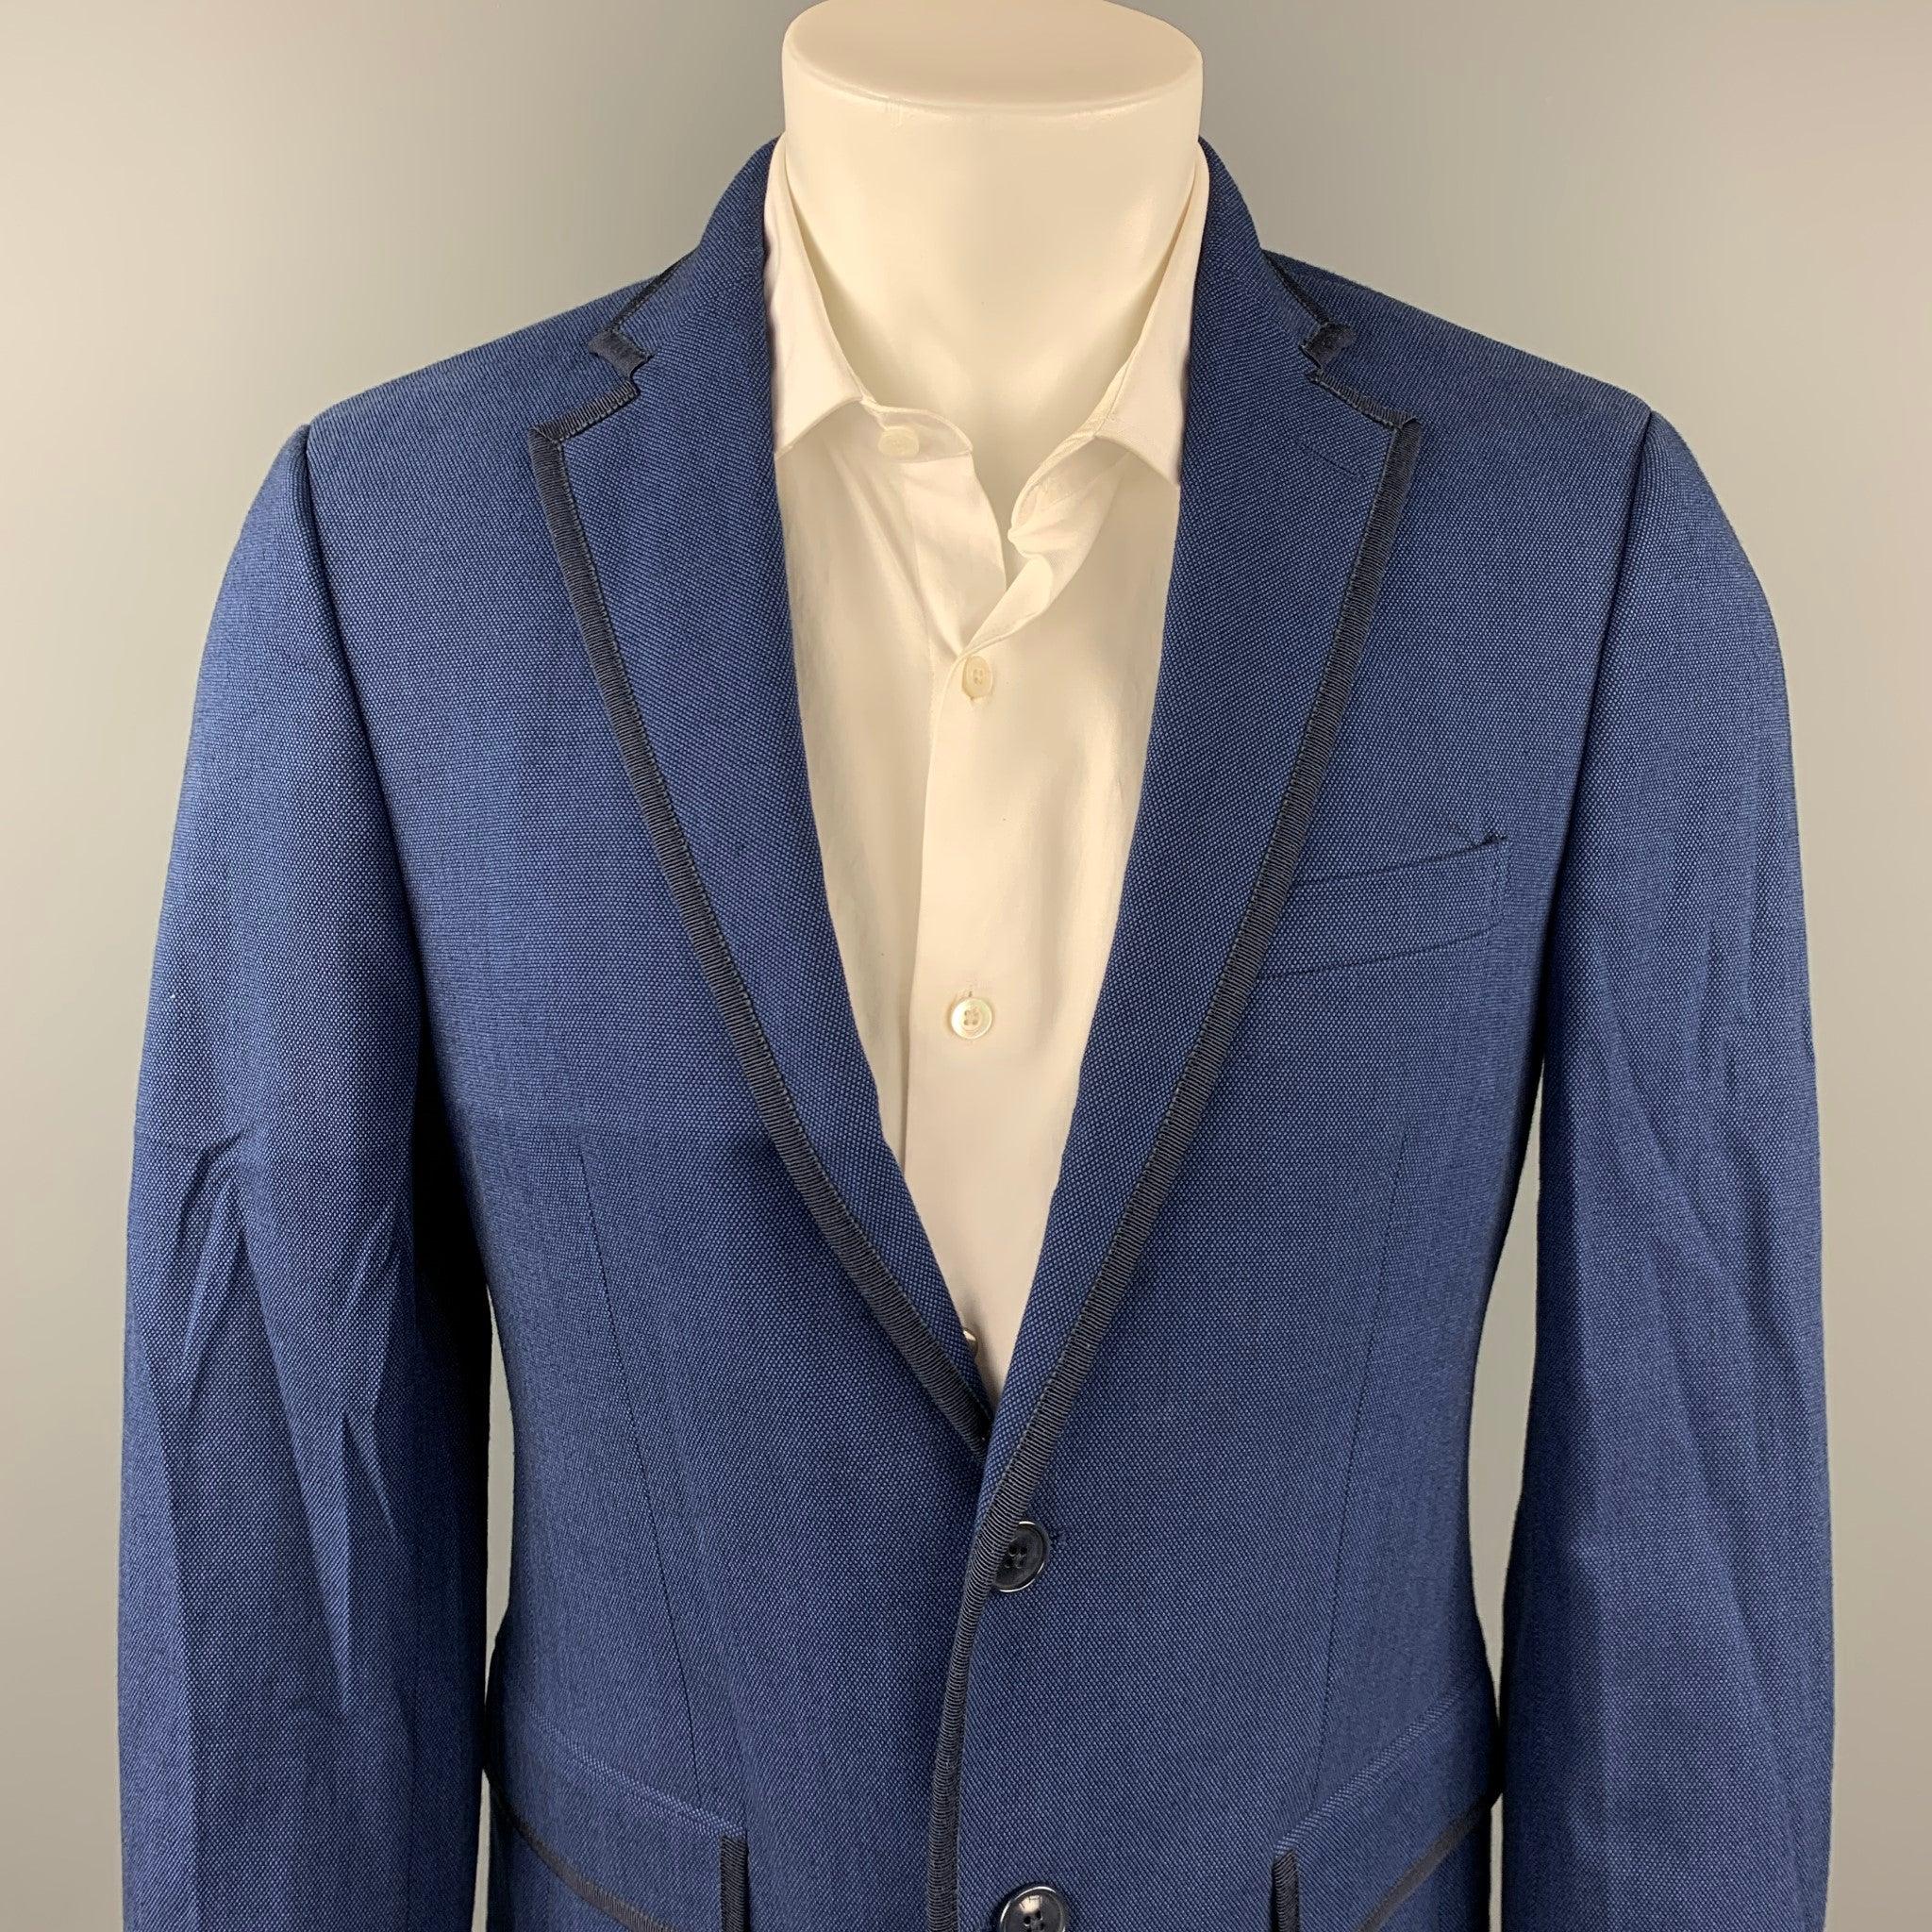 ETRO
sport coat comes in a blue & black nailhead cotton with a full plaid liner featuring a notch lapel, flap pockets, and a two button closure. Made in Italy.Very Good Pre-Owned Condition. 

Marked:   48 

Measurements: 
 
Shoulder: 17.5 inches